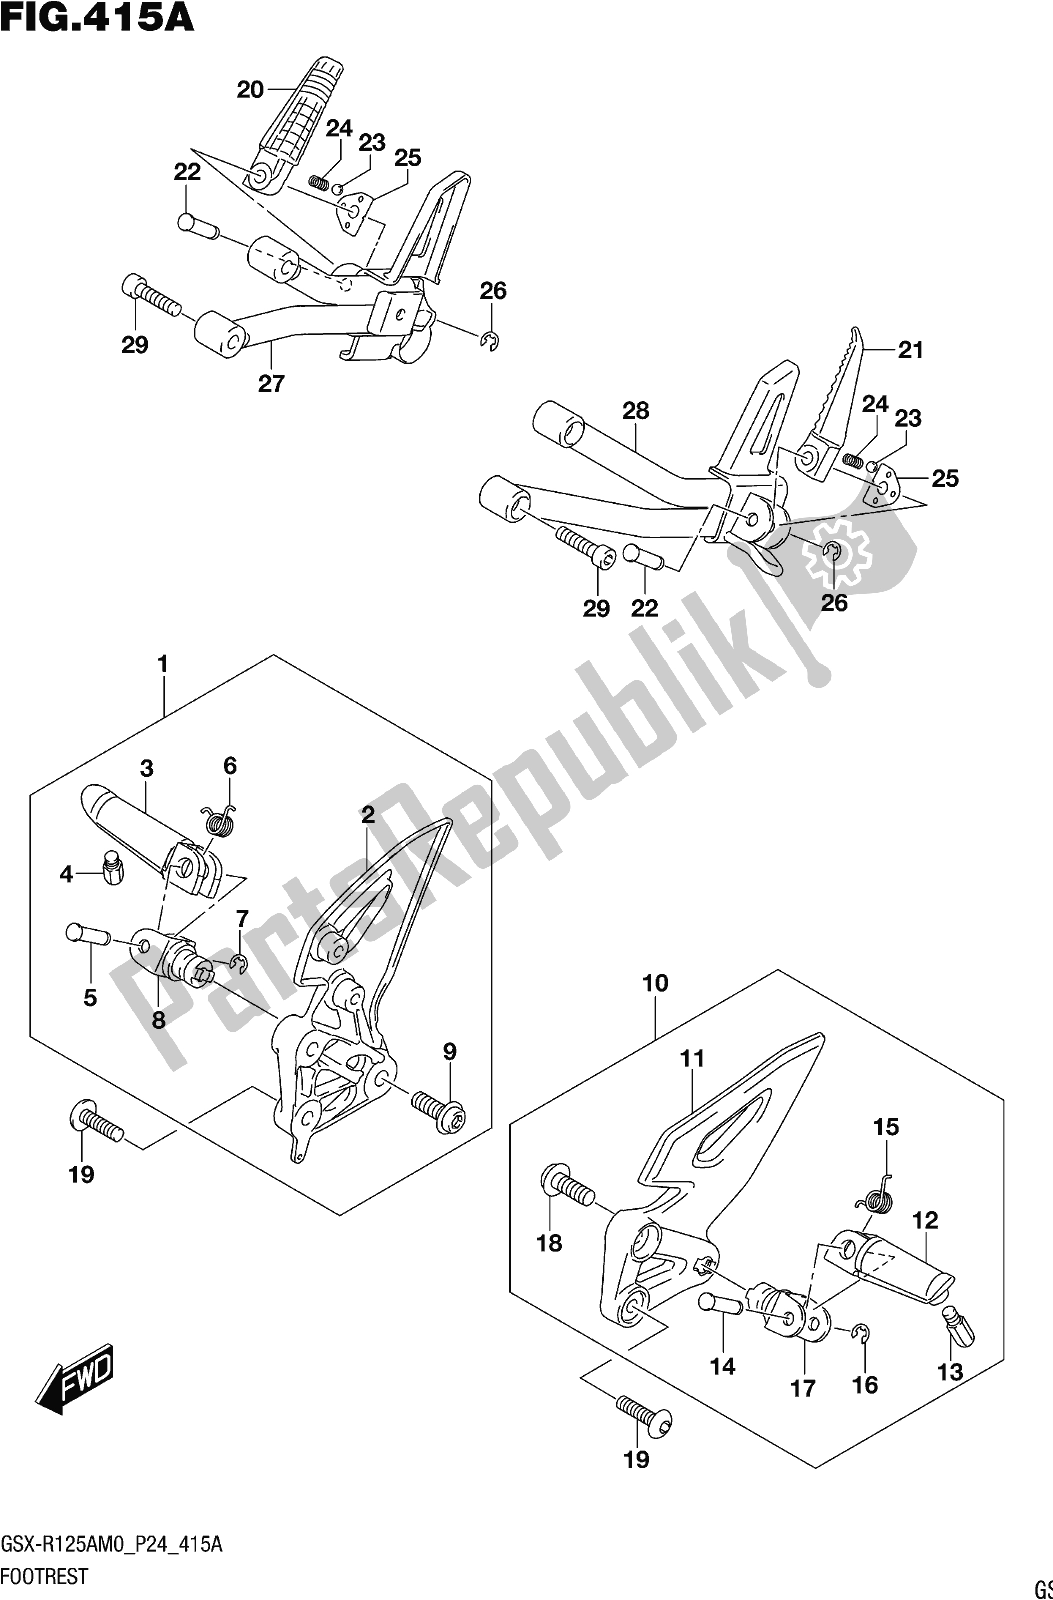 All parts for the Fig. 415a Footrest of the Suzuki Gsx-r 125A 2020